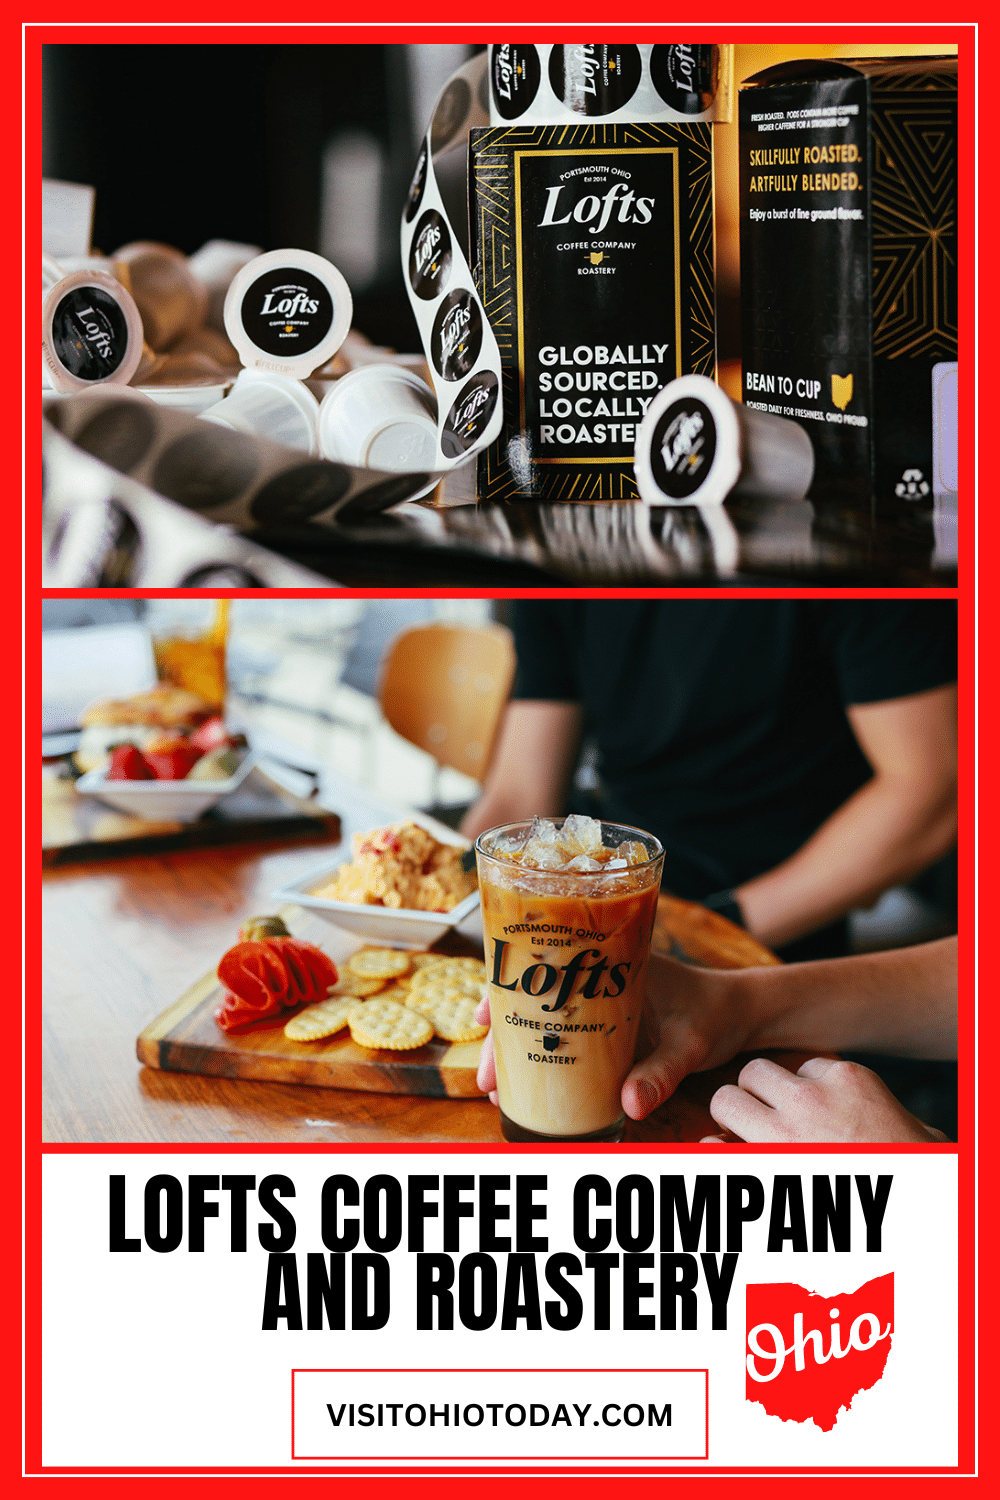 Lofts Coffee Company and Roastery roast their own coffees, have a full bakery, and serve food, wine, and cocktails.  They also make K-cups, which are filled with fresh roasted and fresh ground coffee.  Their coffee pods are 100% recyclable and filled to order.